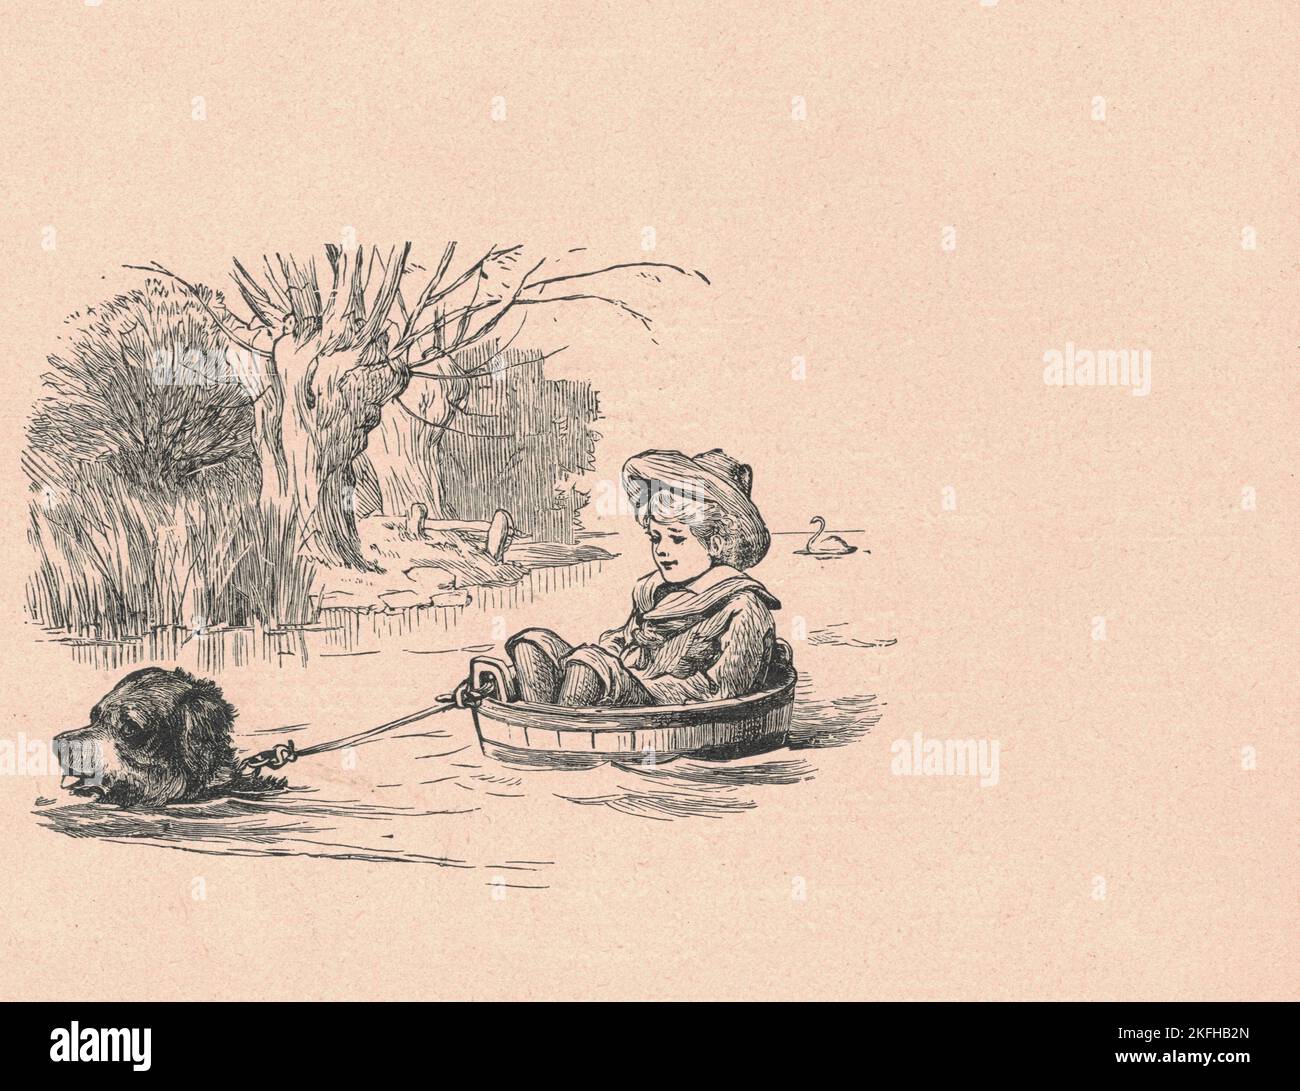 Black and white antique illustration shows a boy and dog sails in the river. Vintage illustration shows the boy sits in the barrel and sails in the river. Old picture from fairy tale book. Storybook illustration published 1910. Oral storytelling is the earliest method for sharing narratives. During most people's childhoods, narratives are used to guide them on proper behavior, cultural history, formation of a communal identity, and values, as especially studied in anthropology today among traditional indigenous peoples. Stock Photo